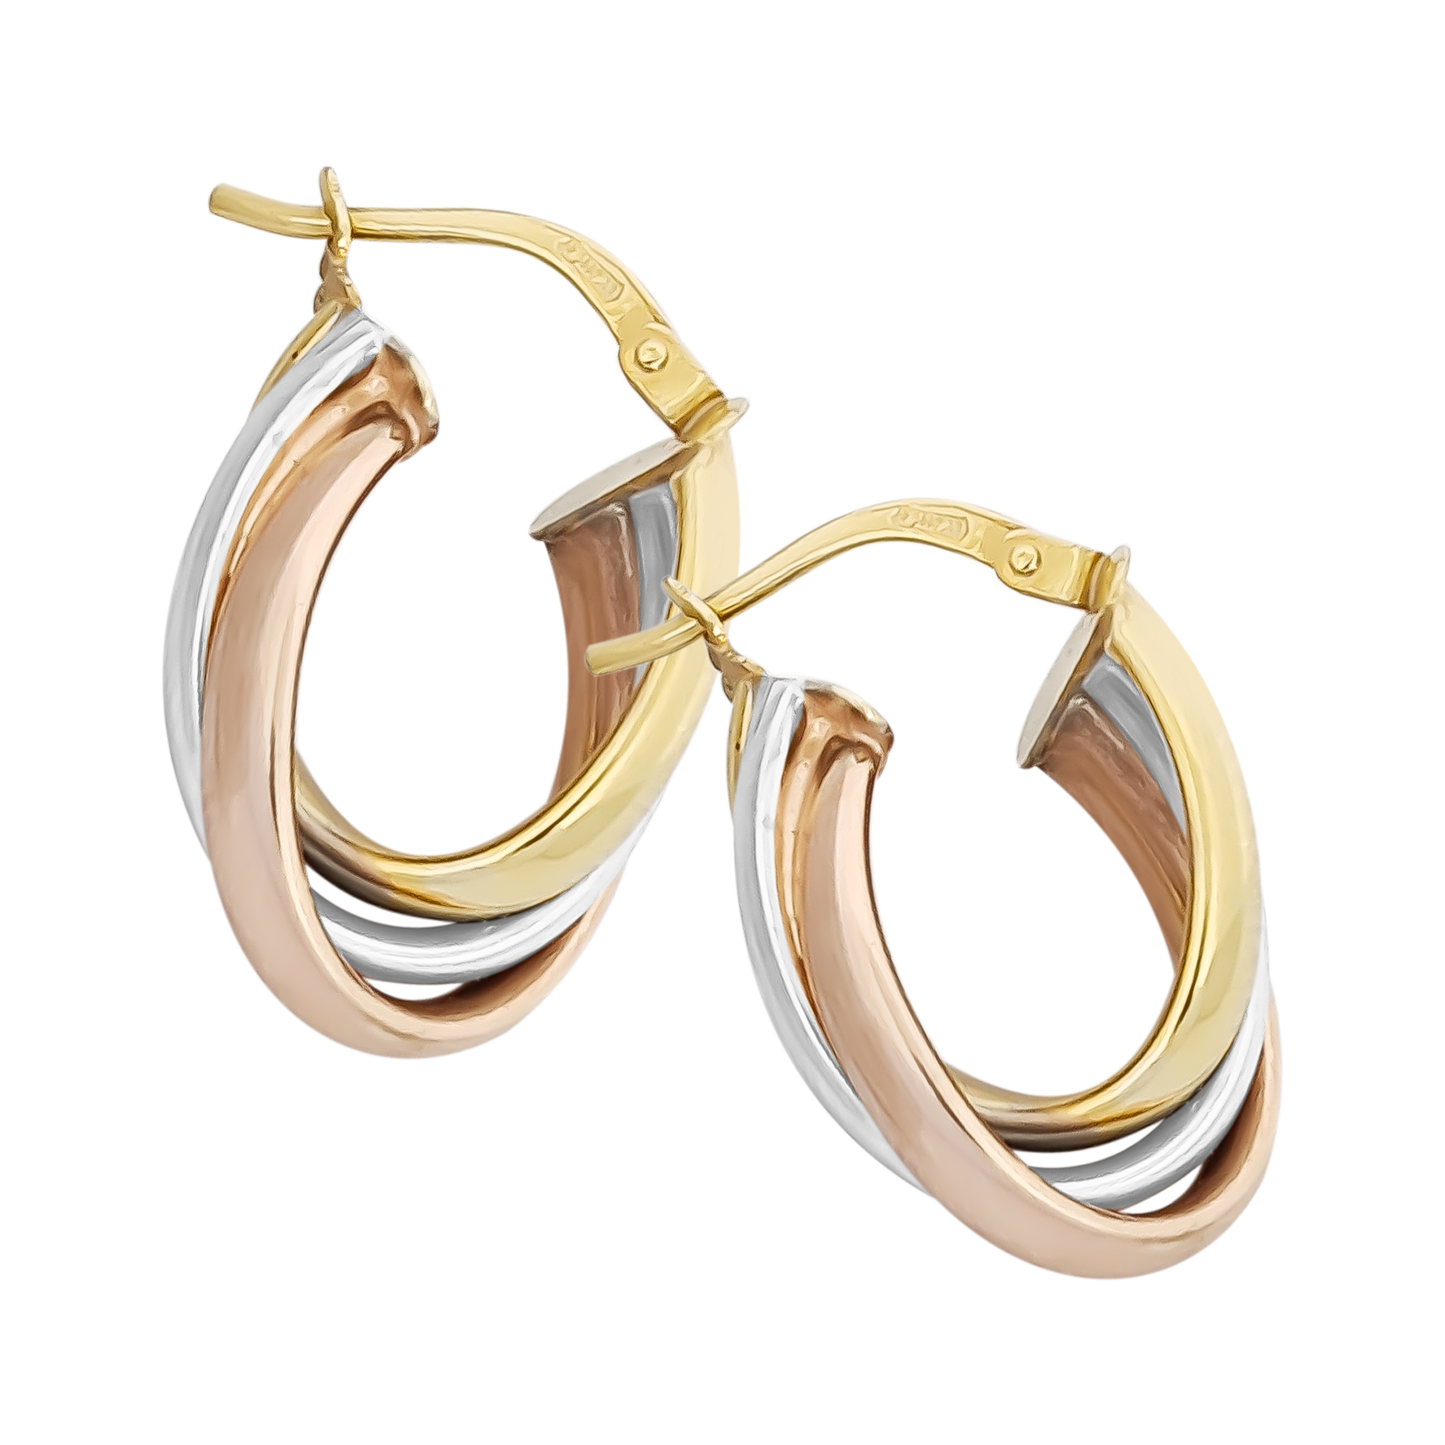 2cm Tri Close Loop Hoops in 9ct Yellow, Rose and White Gold